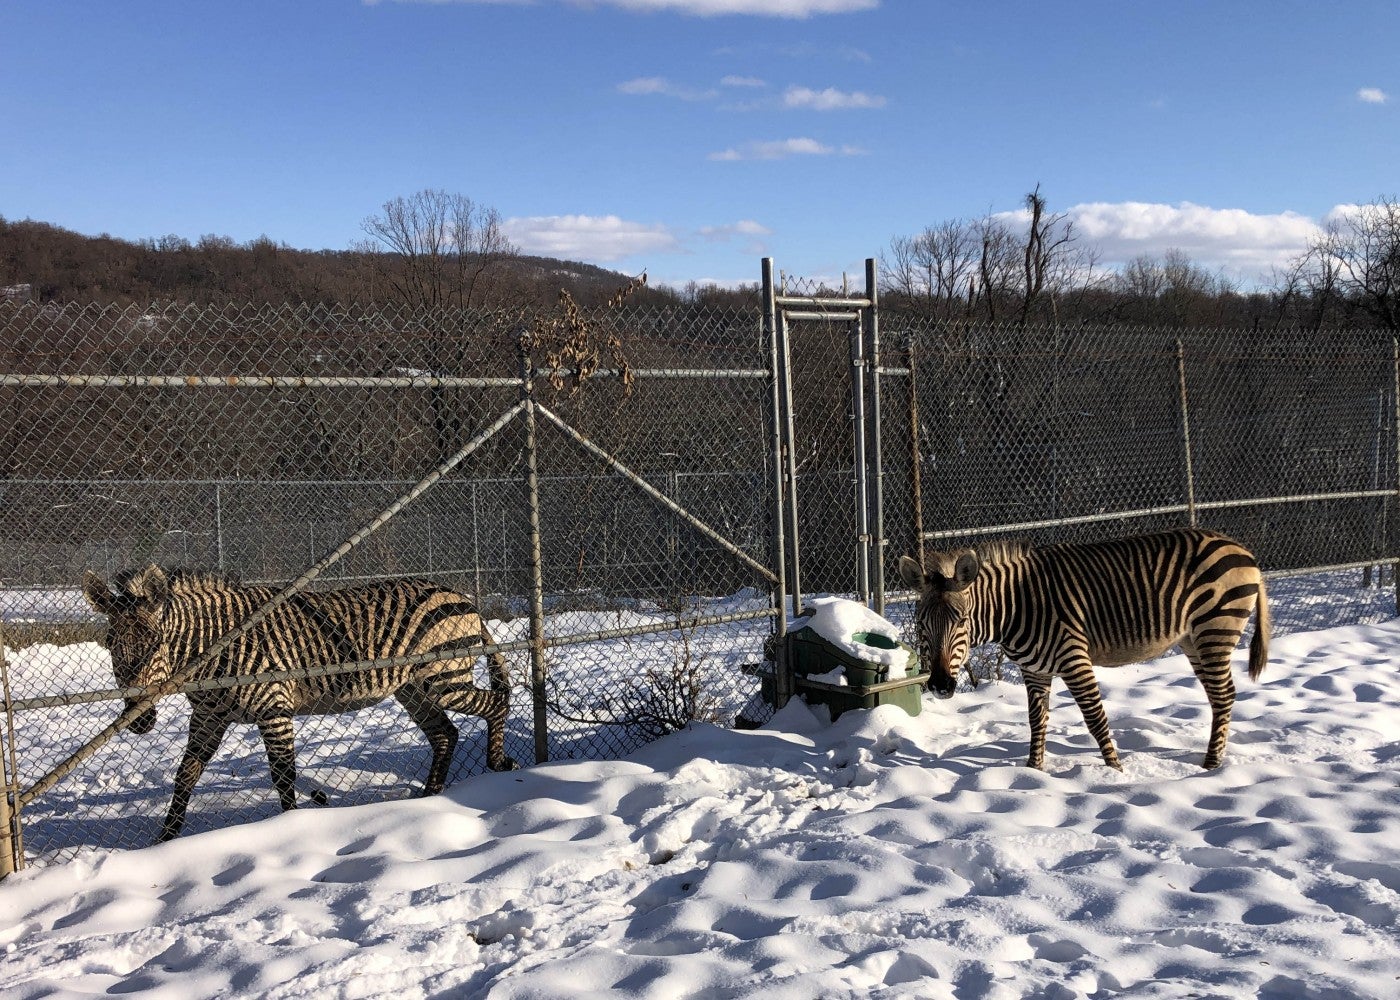 Two zebras in the snow, standing near each other but separated by a fence